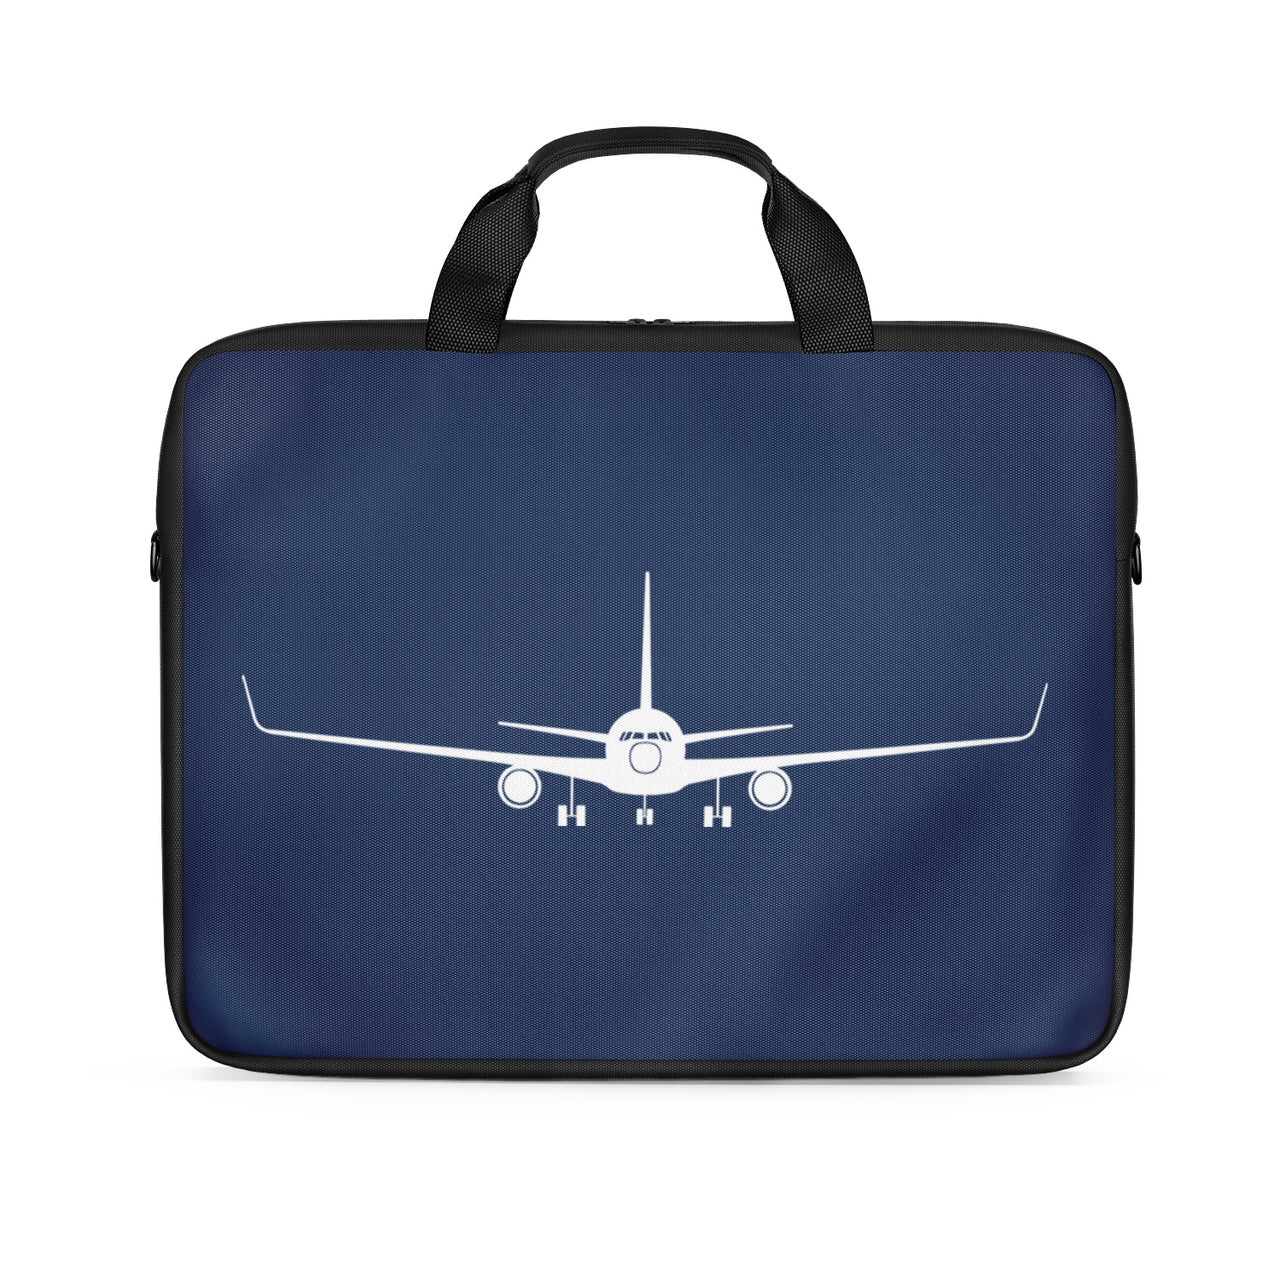 Boeing 767 Silhouette Designed Laptop & Tablet Bags